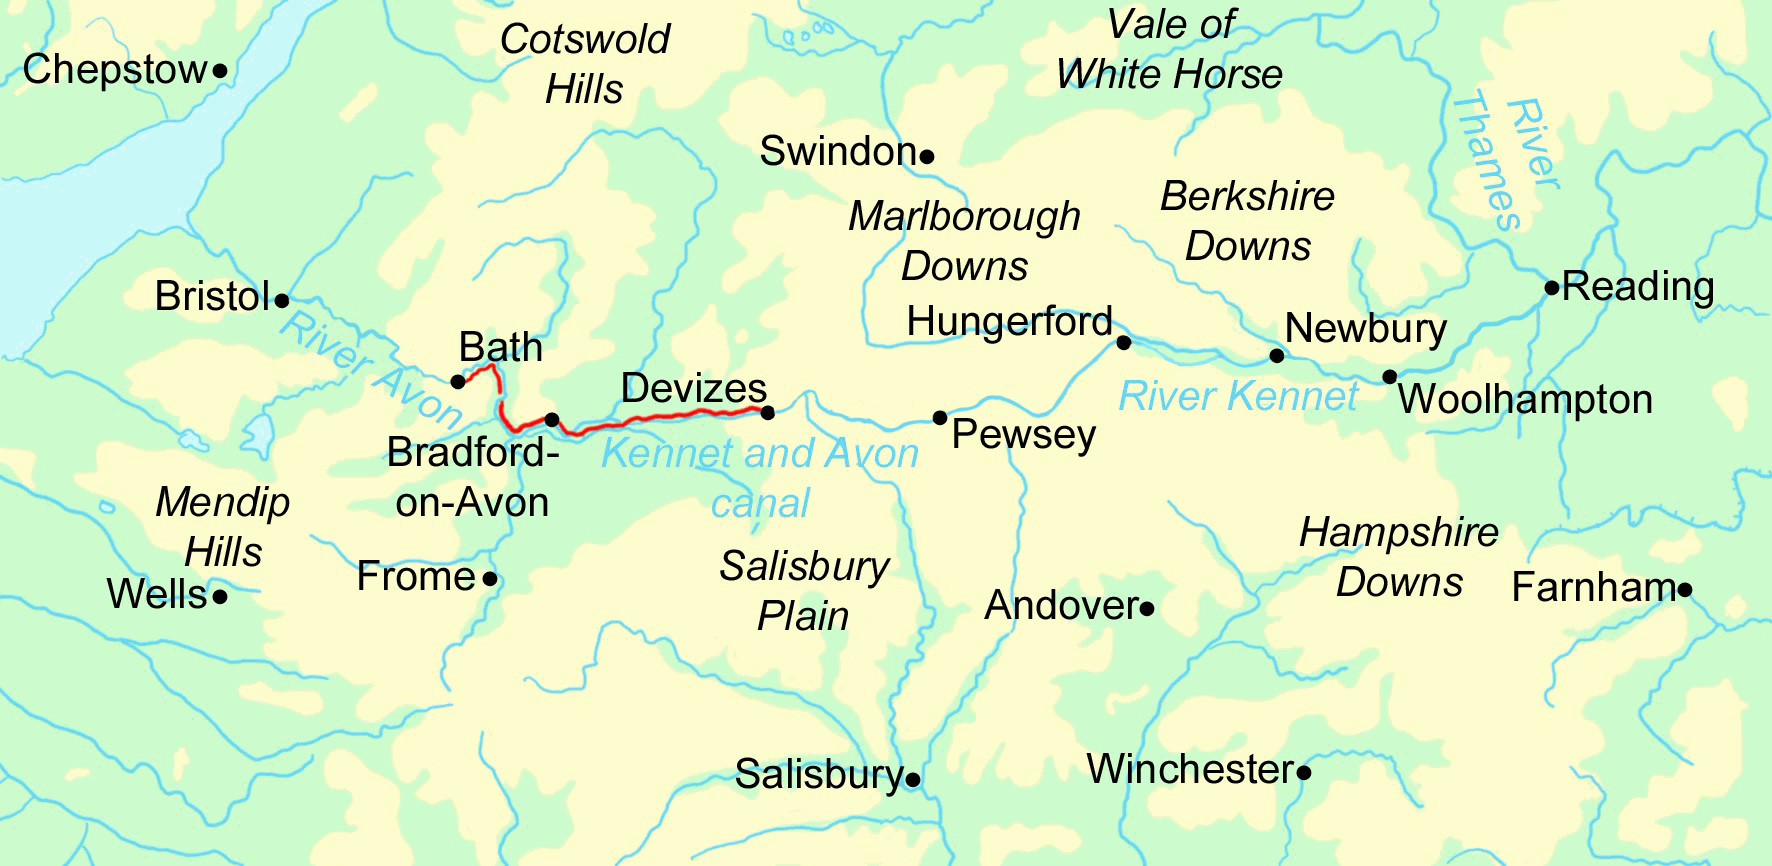 Kennet and Avon Canal - Stile-Free map